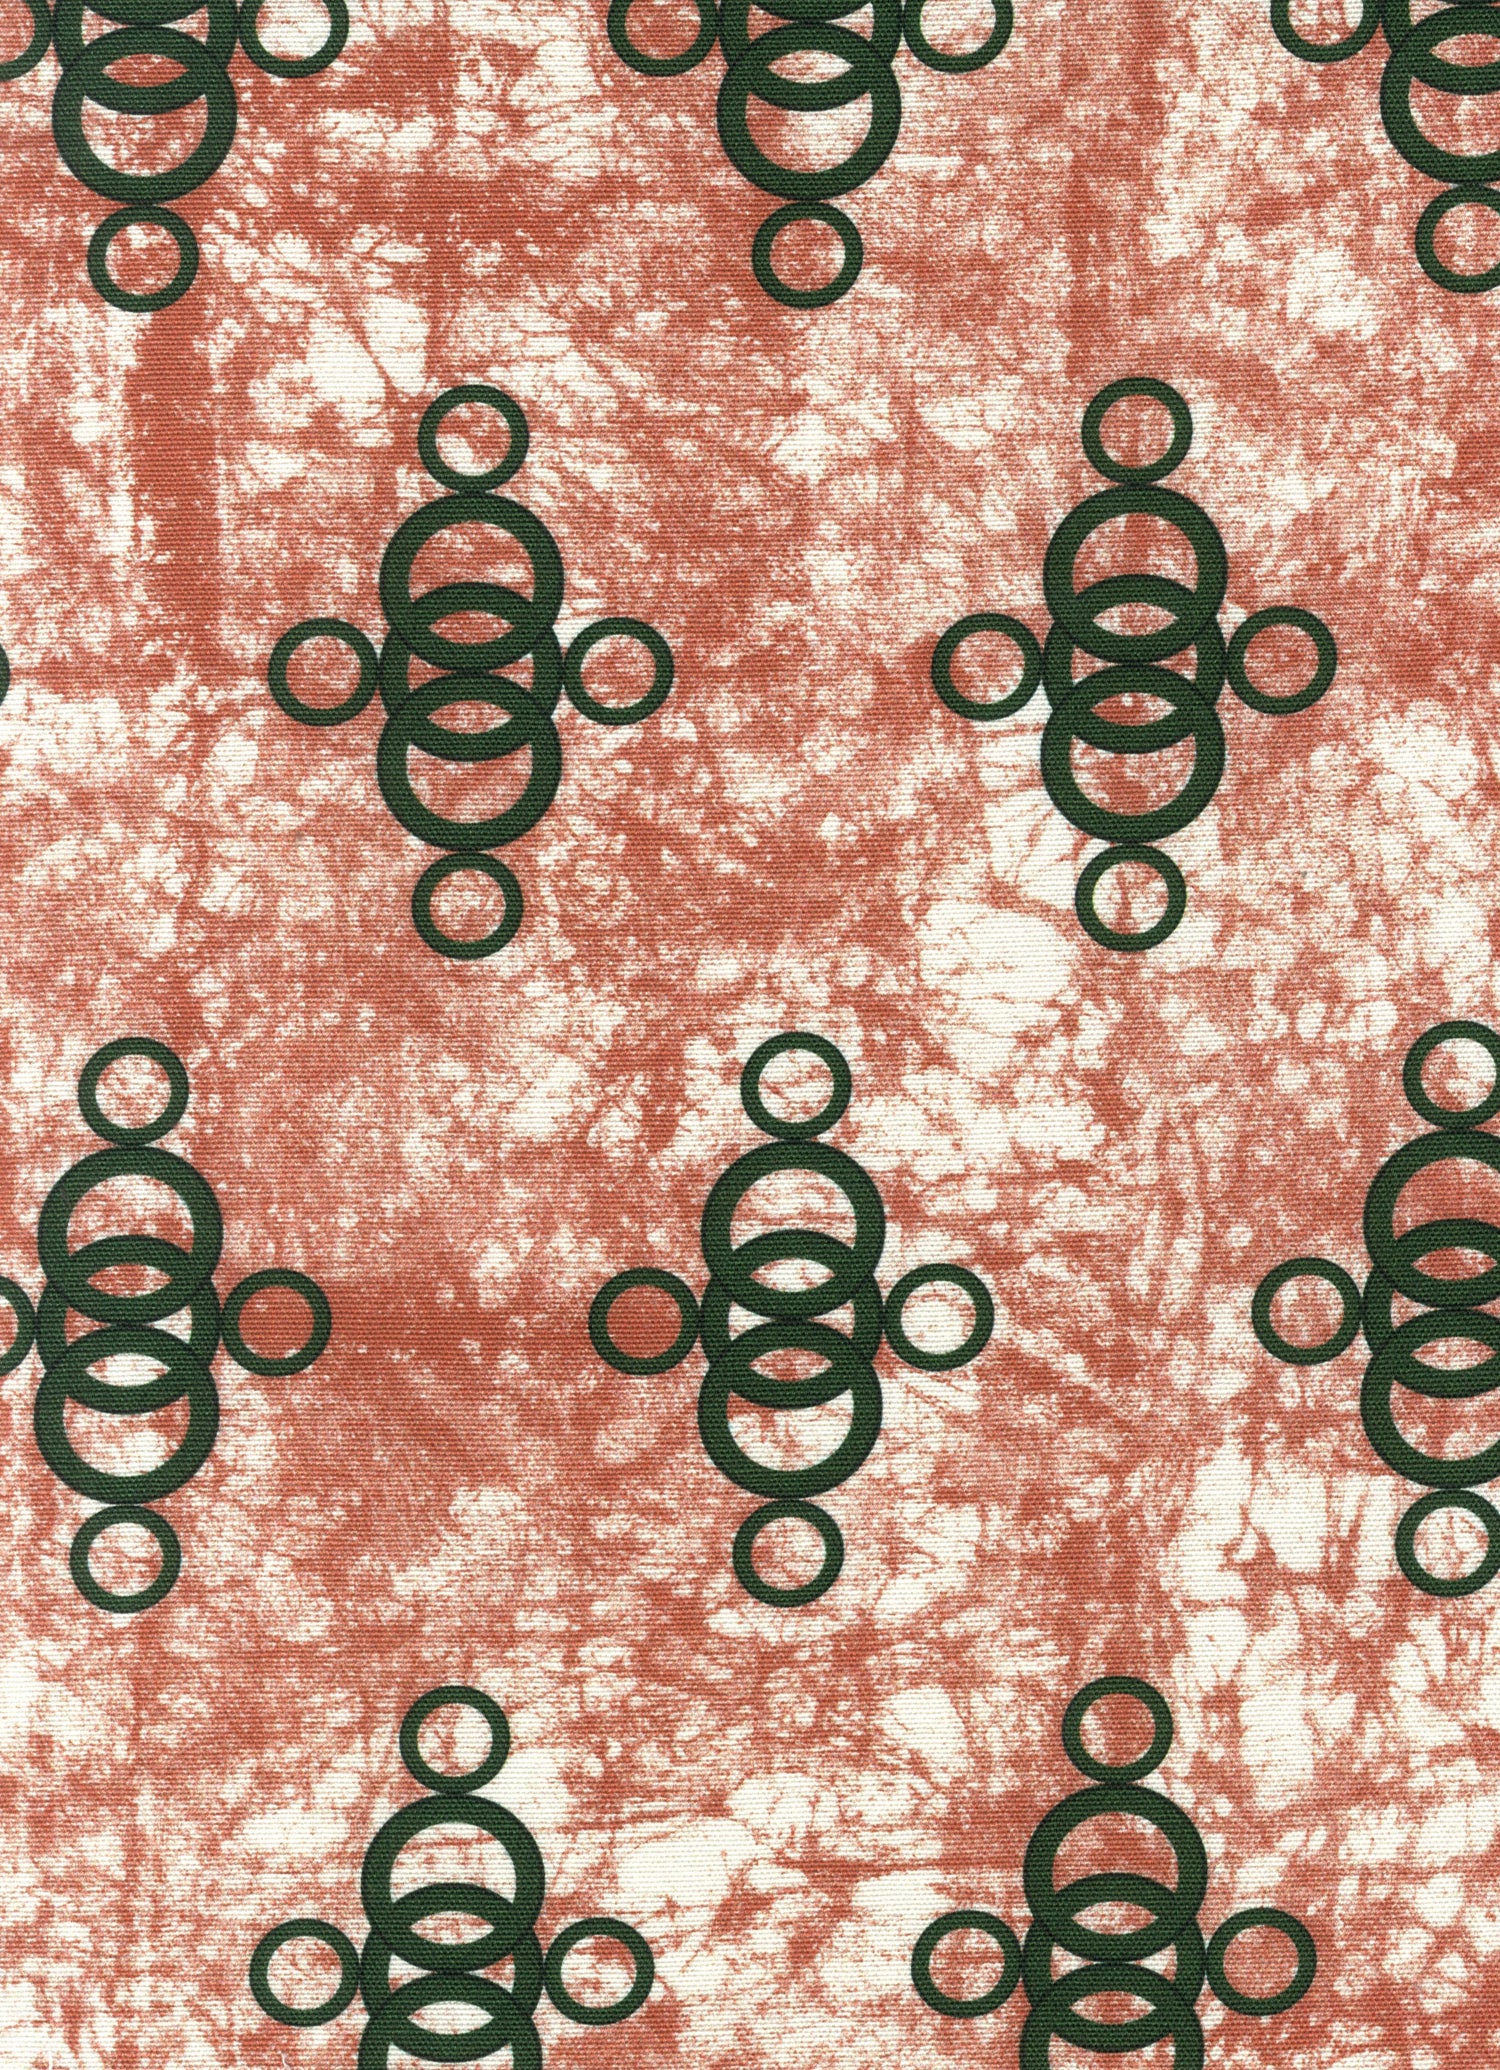 Detail of fabric in a curving lattice print in dark green on a mottled coral field.